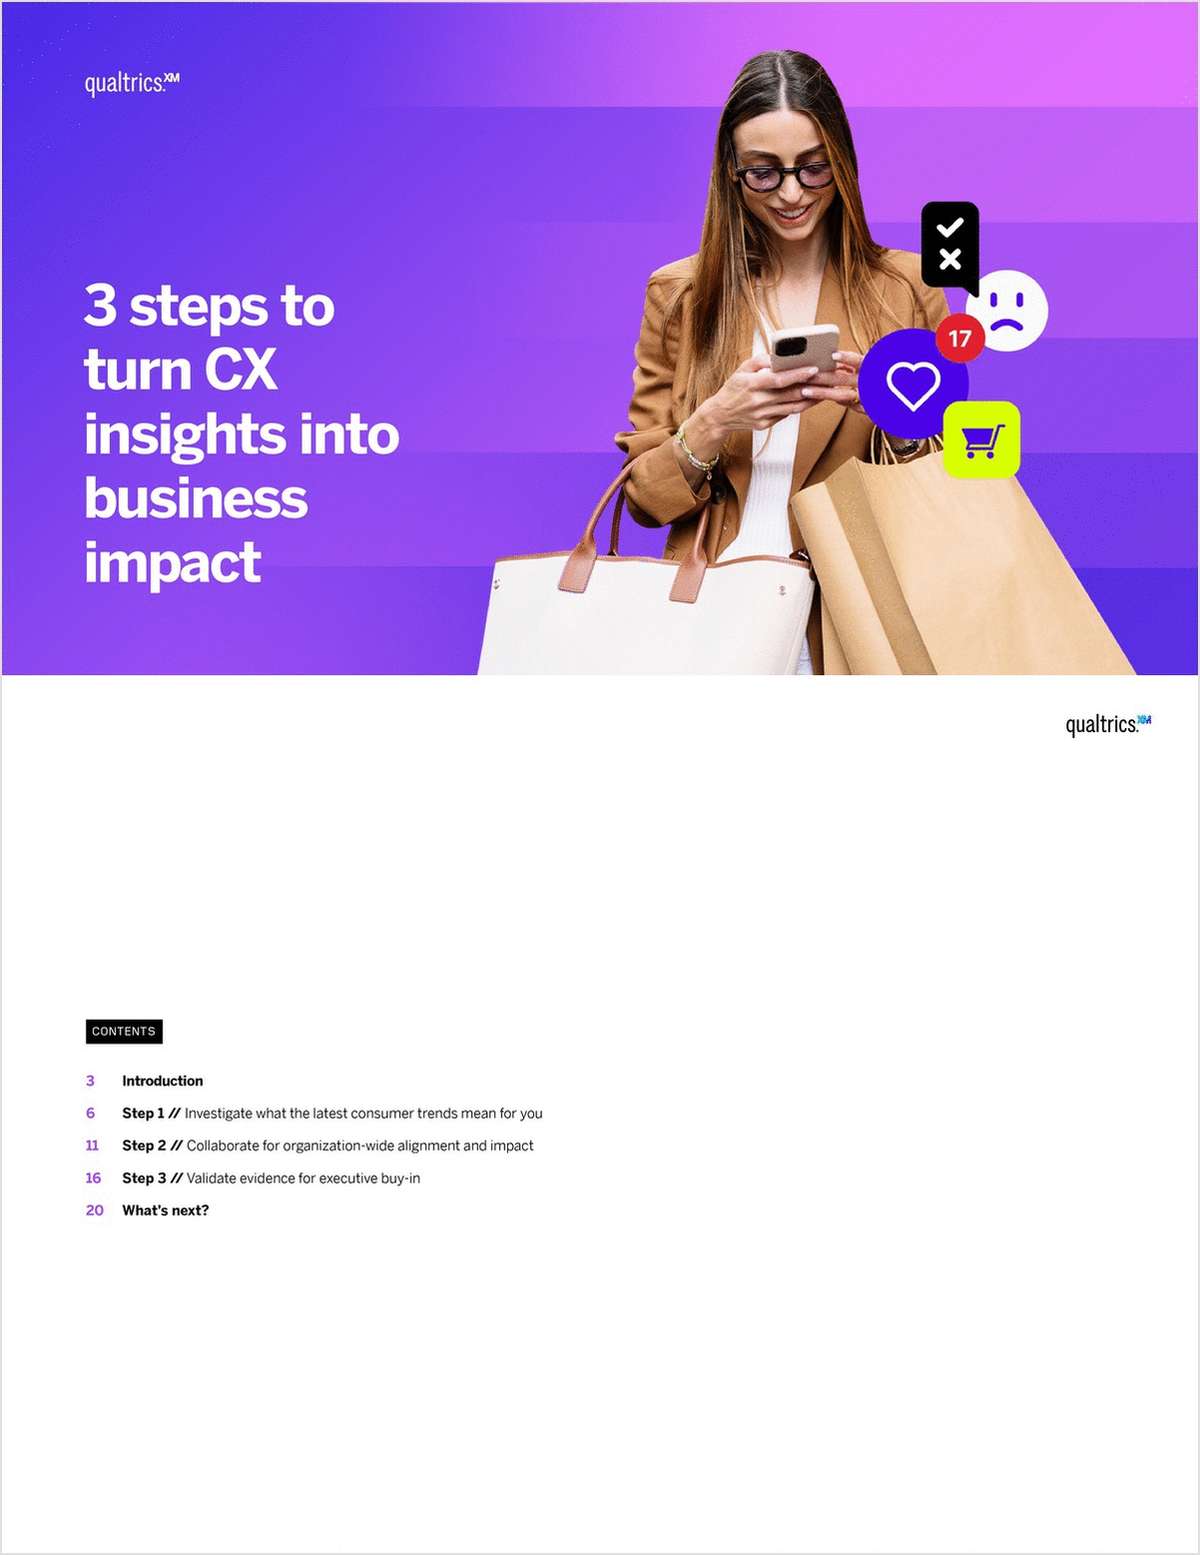 3 steps to turn CX insights into business impact